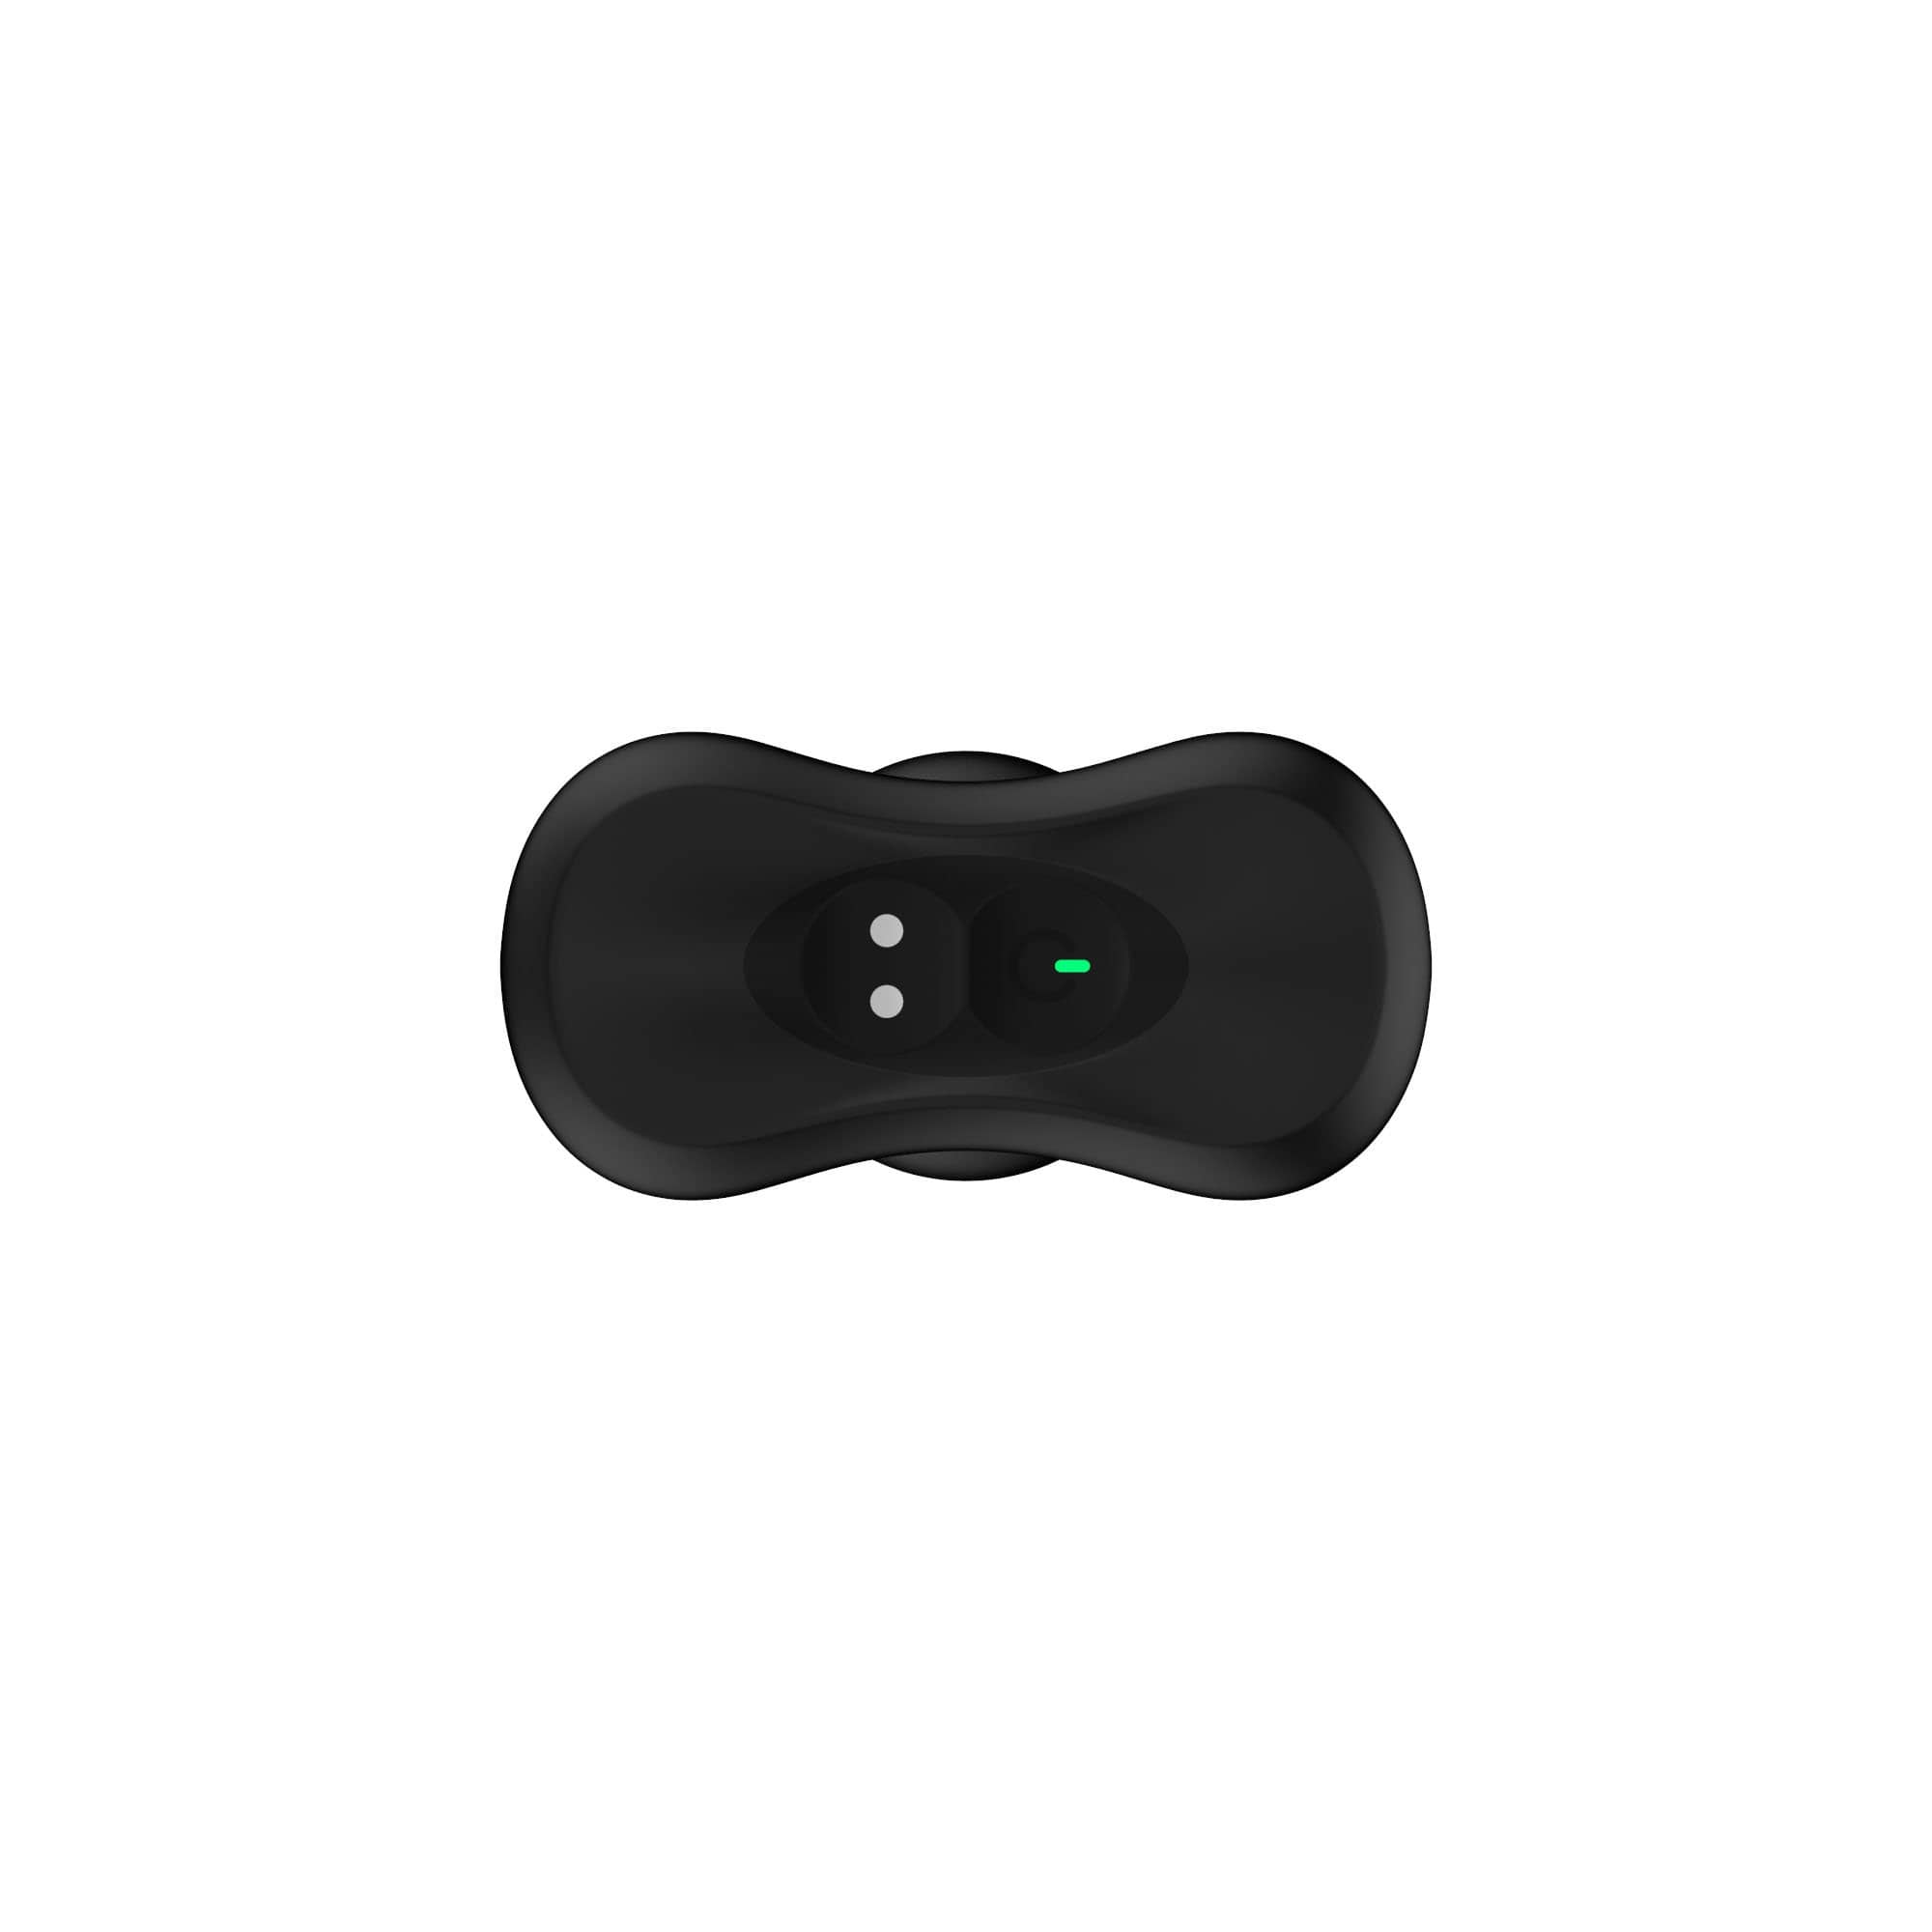 Nexus - Bolster Rechargeable Inflatable Prostate Butt Plug with Remote Control (Black) Anal Plug (Vibration) Rechargeable 5060274221469 CherryAffairs